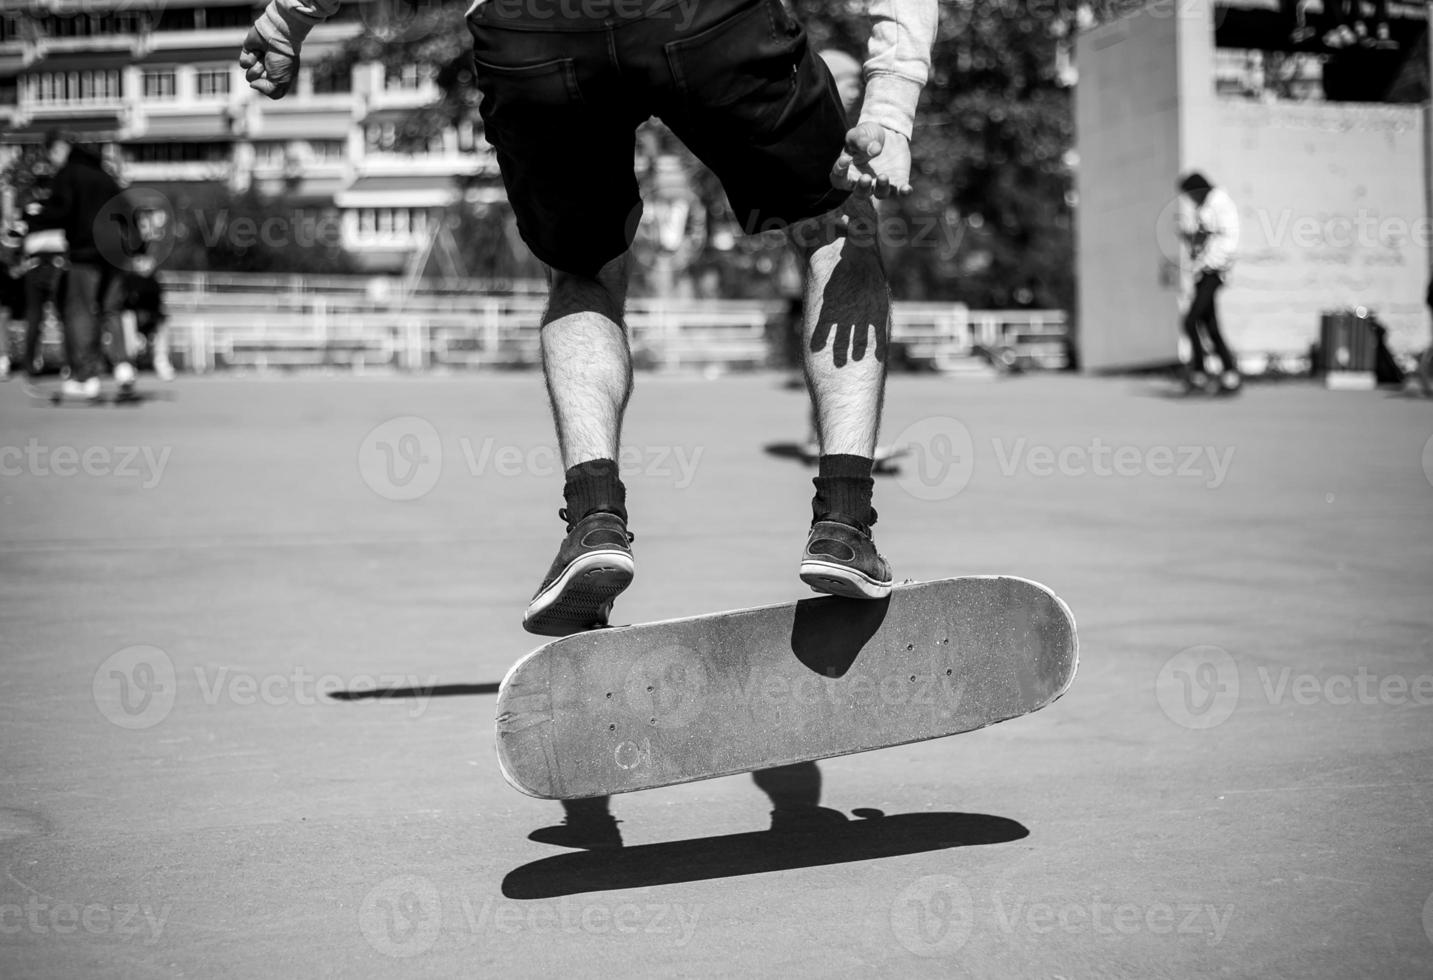 skateboarder does the trick with a jump on the ramp. Skateboarder flying in the air photo